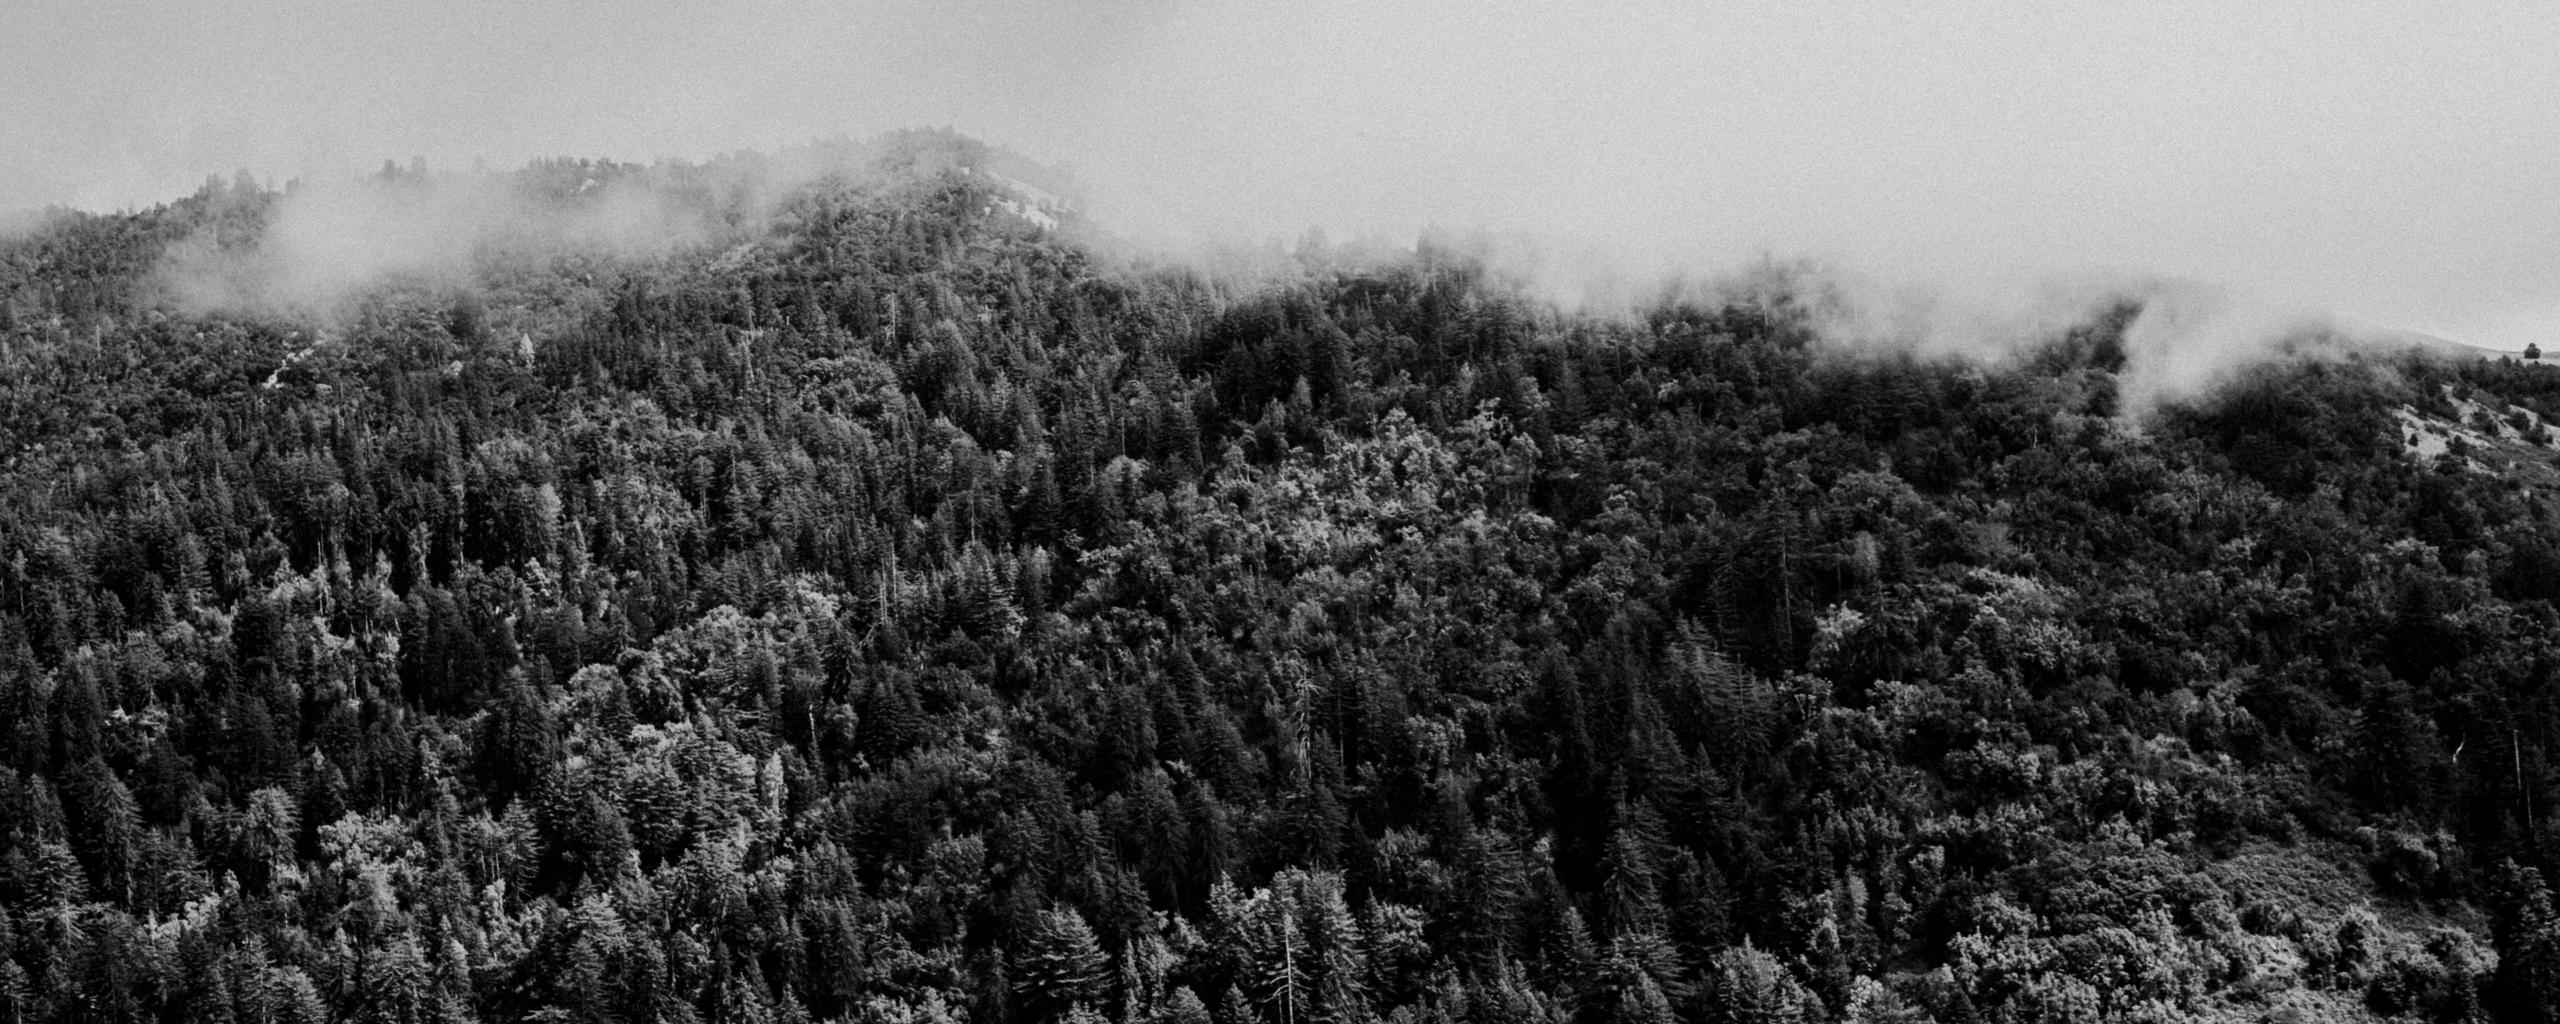 Fog rolling in over mountains in Big Sur, California